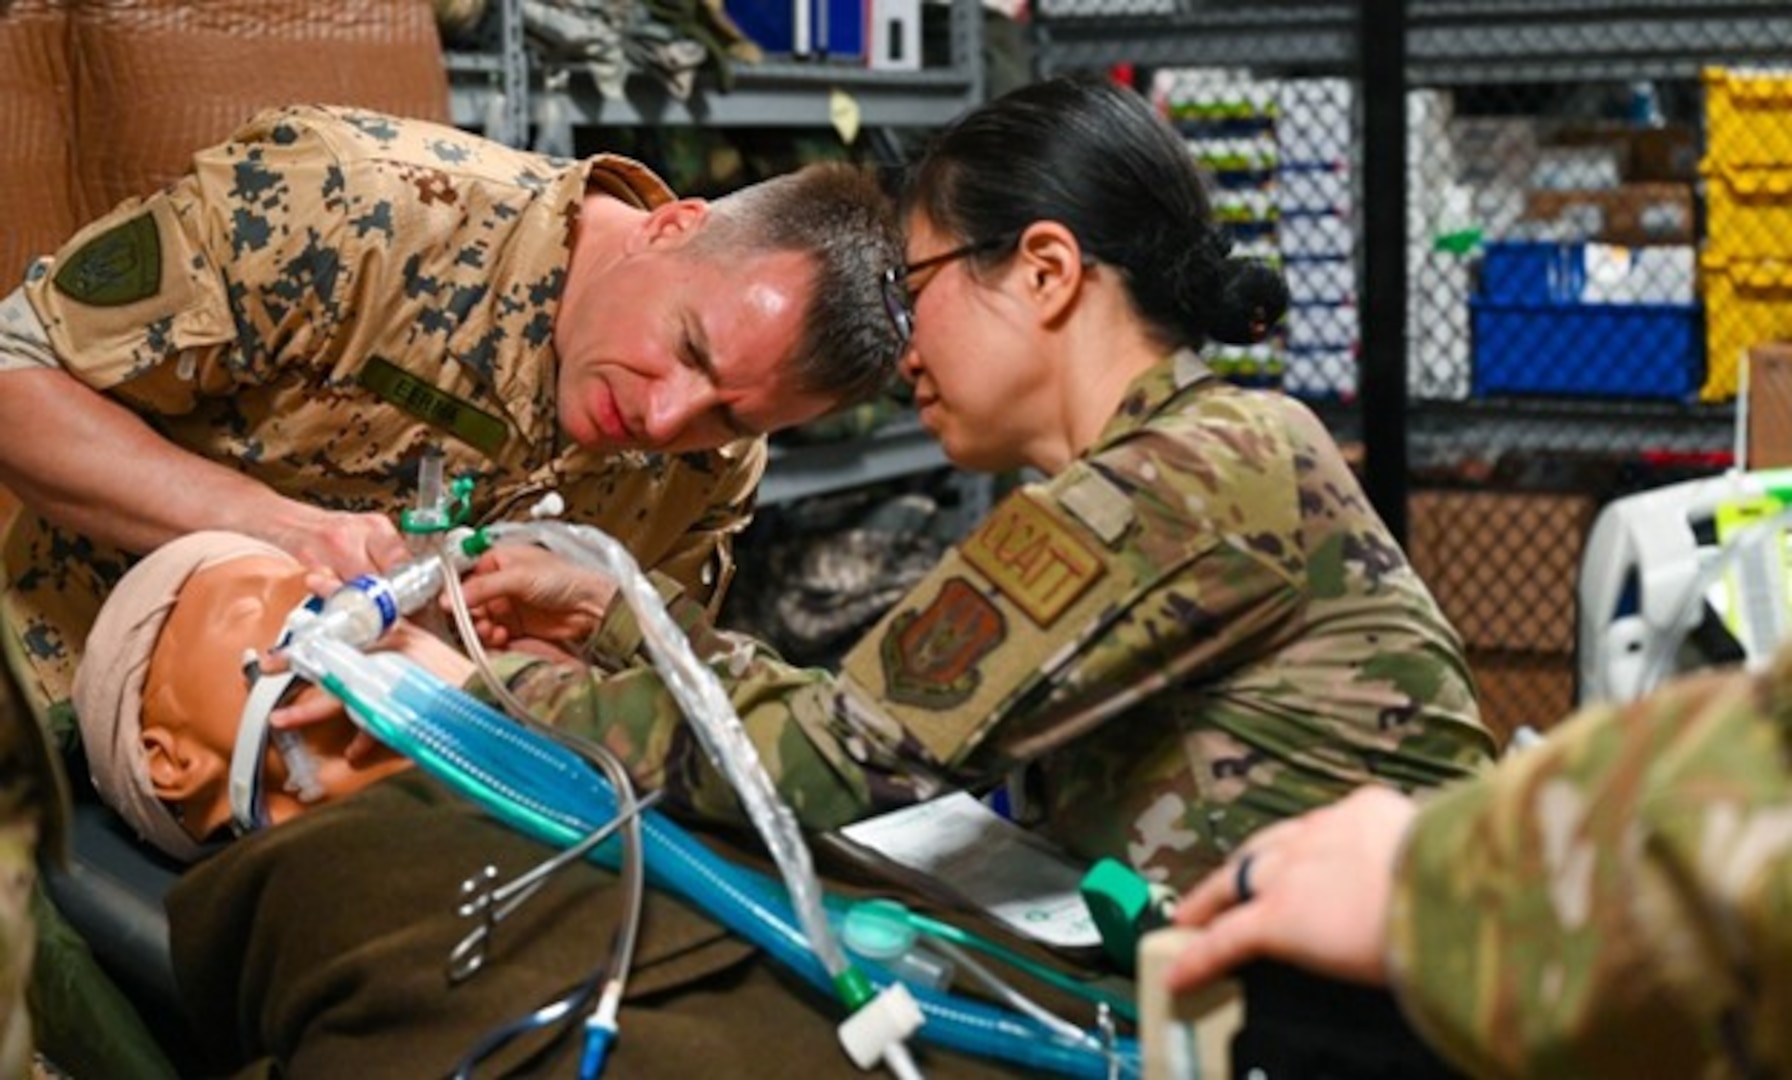 U.S. Air Force Maj. Alisha Young, center, 433rd Medical Group Critical Care Air Transport Team physician, demonstrates how to adjust respiratory control equipment to 1st Lt. Martti Eerma, left, a reservist from the Estonia Defense Force at Joint Base San Antonio - Lackland, Texas, June 4, 2023. The exchange program encourages reservists to exchange forces to improve NATO interoperability through an official agreement with the Estonian Embassy in Washington, D.C., on Feb.10, 2015. (U.S. Air Force photo by Staff Sgt. Adriana Barrientos)